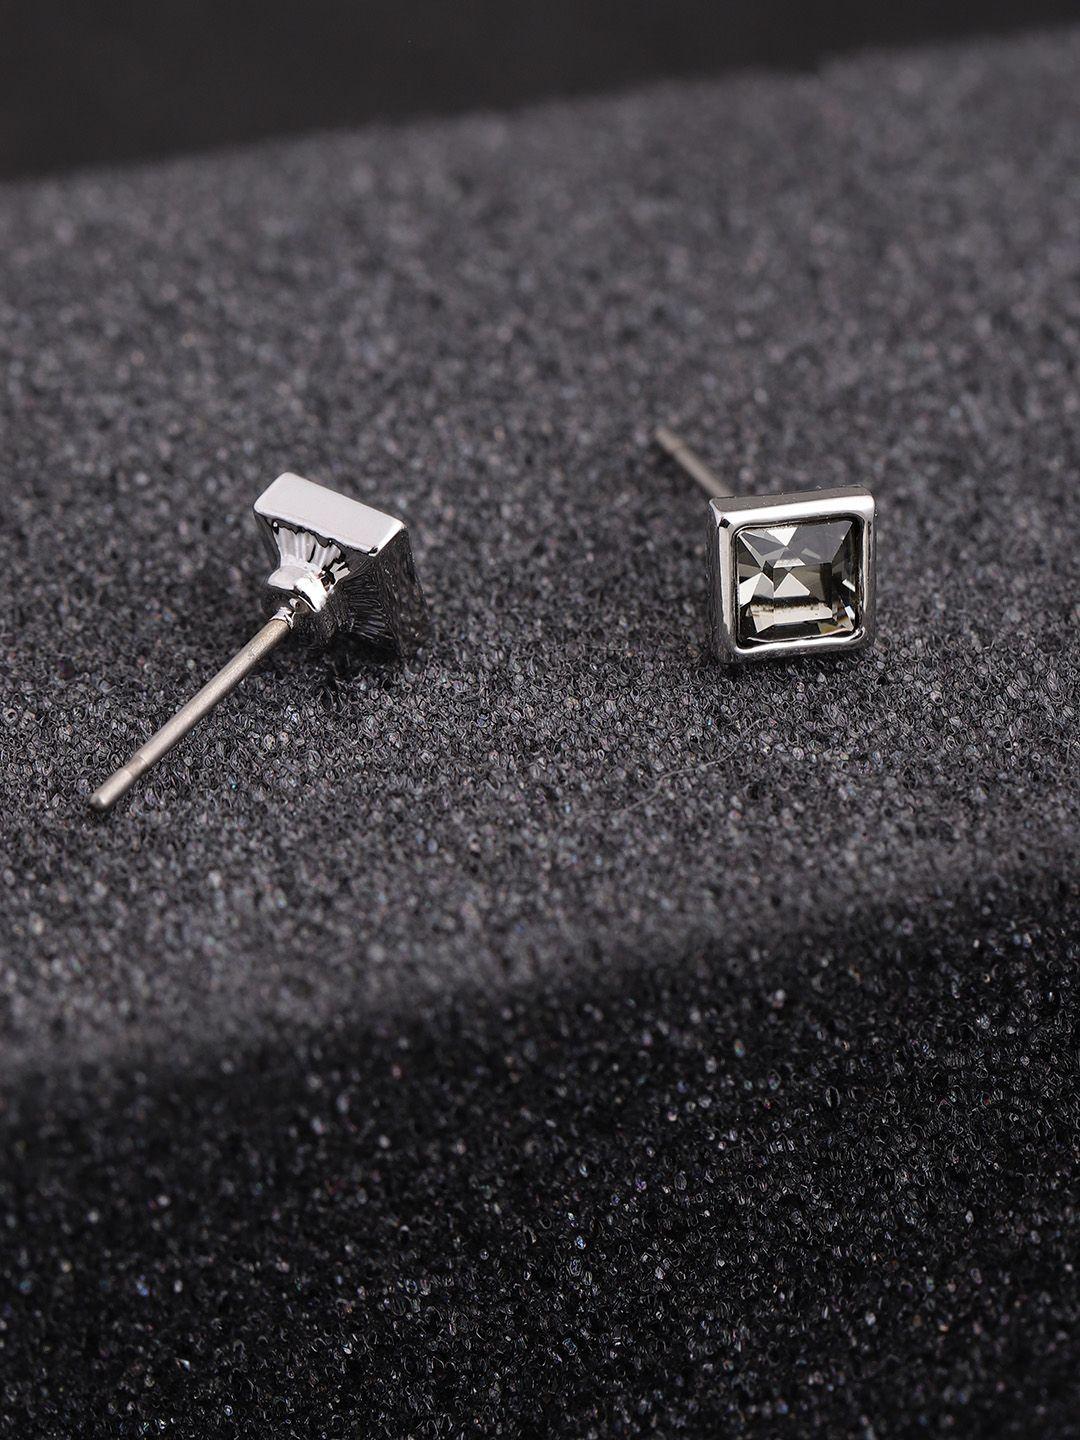 carlton london silver-toned & charcoal grey stone studded square studs